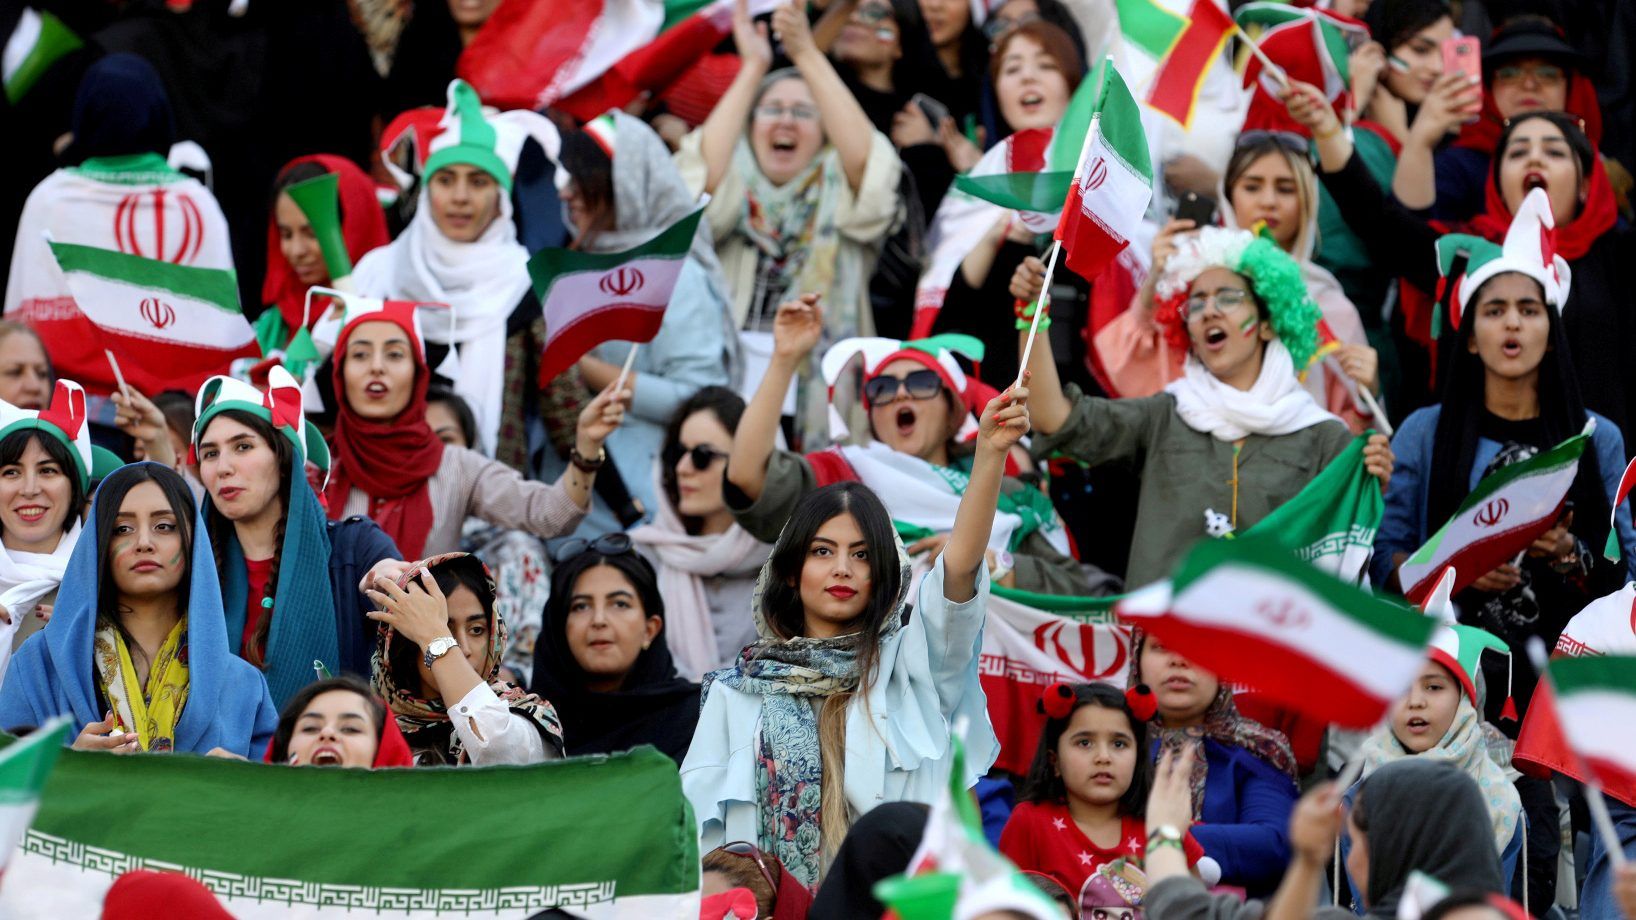 Iran Proves That Lifting Its Ban On Women In Soccer Stadiums Is A Gauge Not A Win Nestia